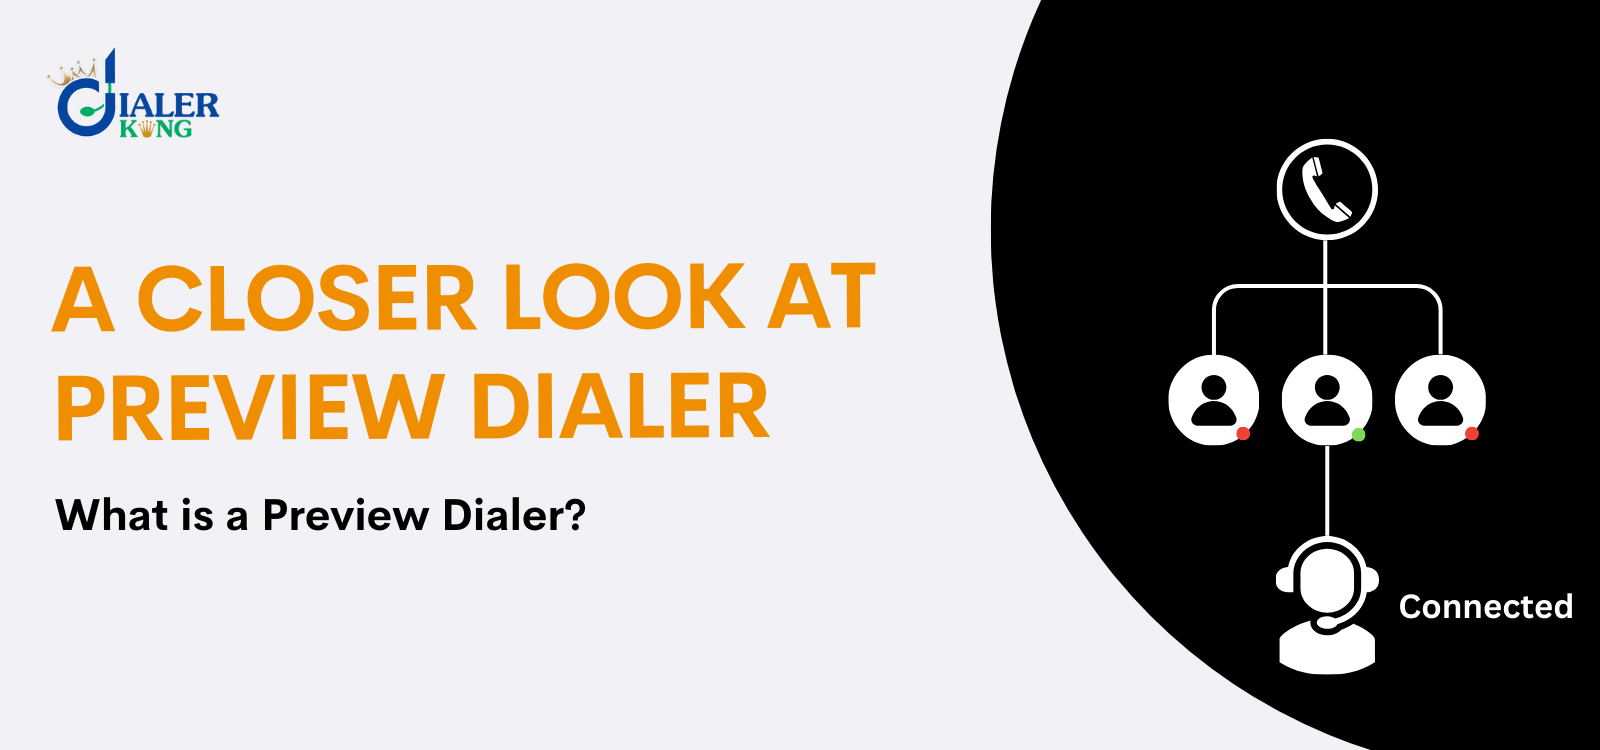 A Closer Look at Preview Dialer